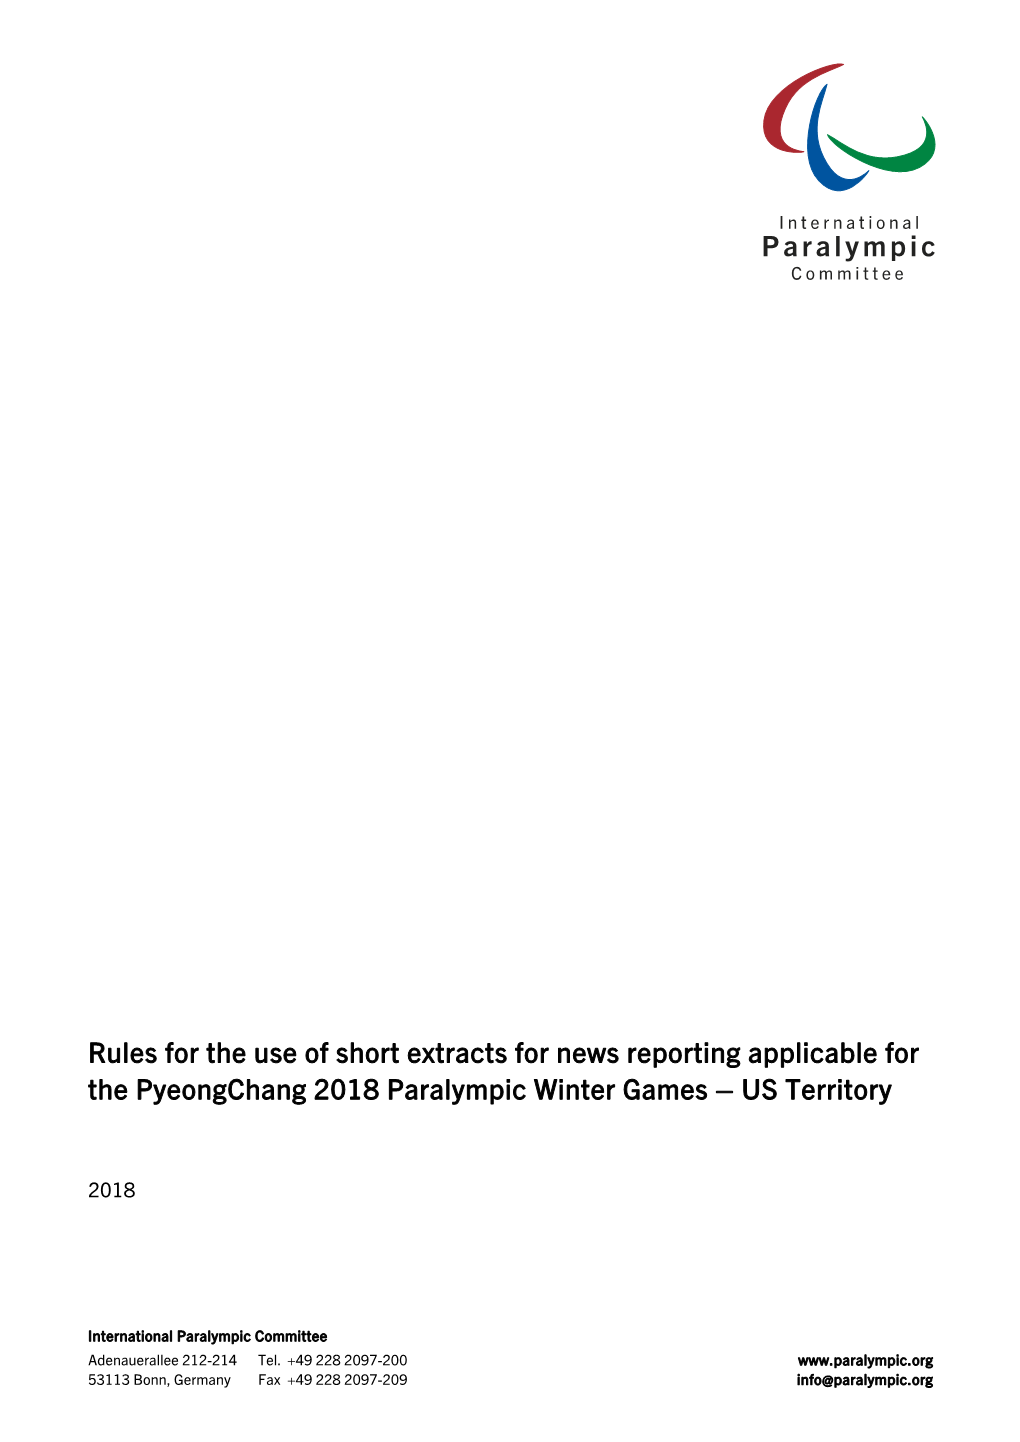 Rules for the Use of Short Extracts for News Reporting Applicable for the Pyeongchang 2018 Paralympic Winter Games – US Territory